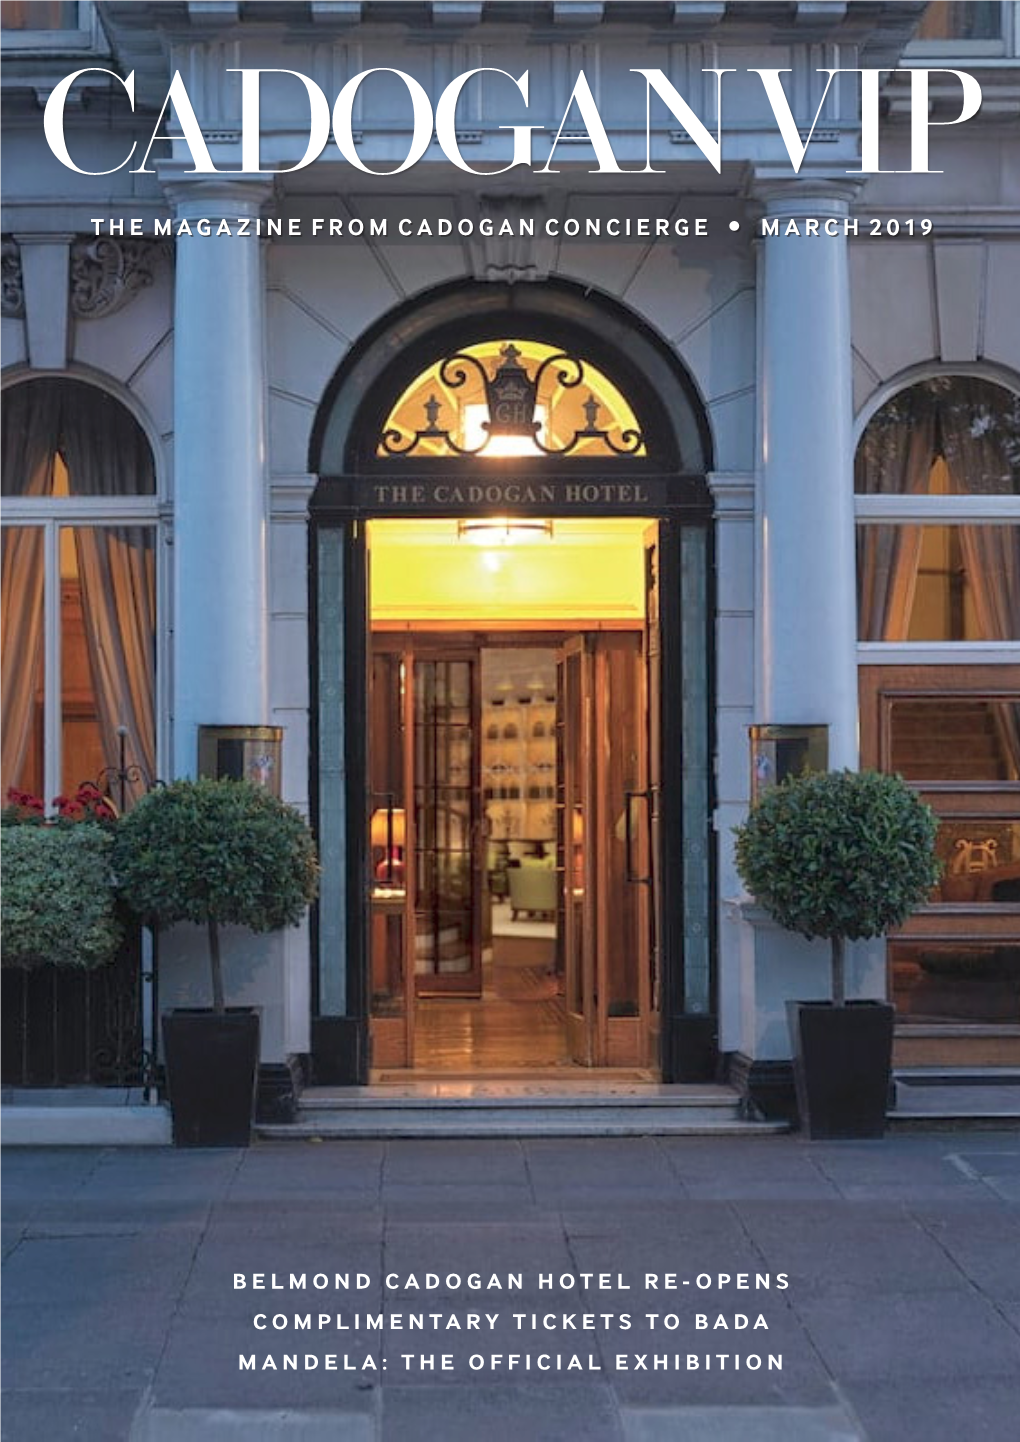 The Magazine from Cadogan Concierge • March 2019